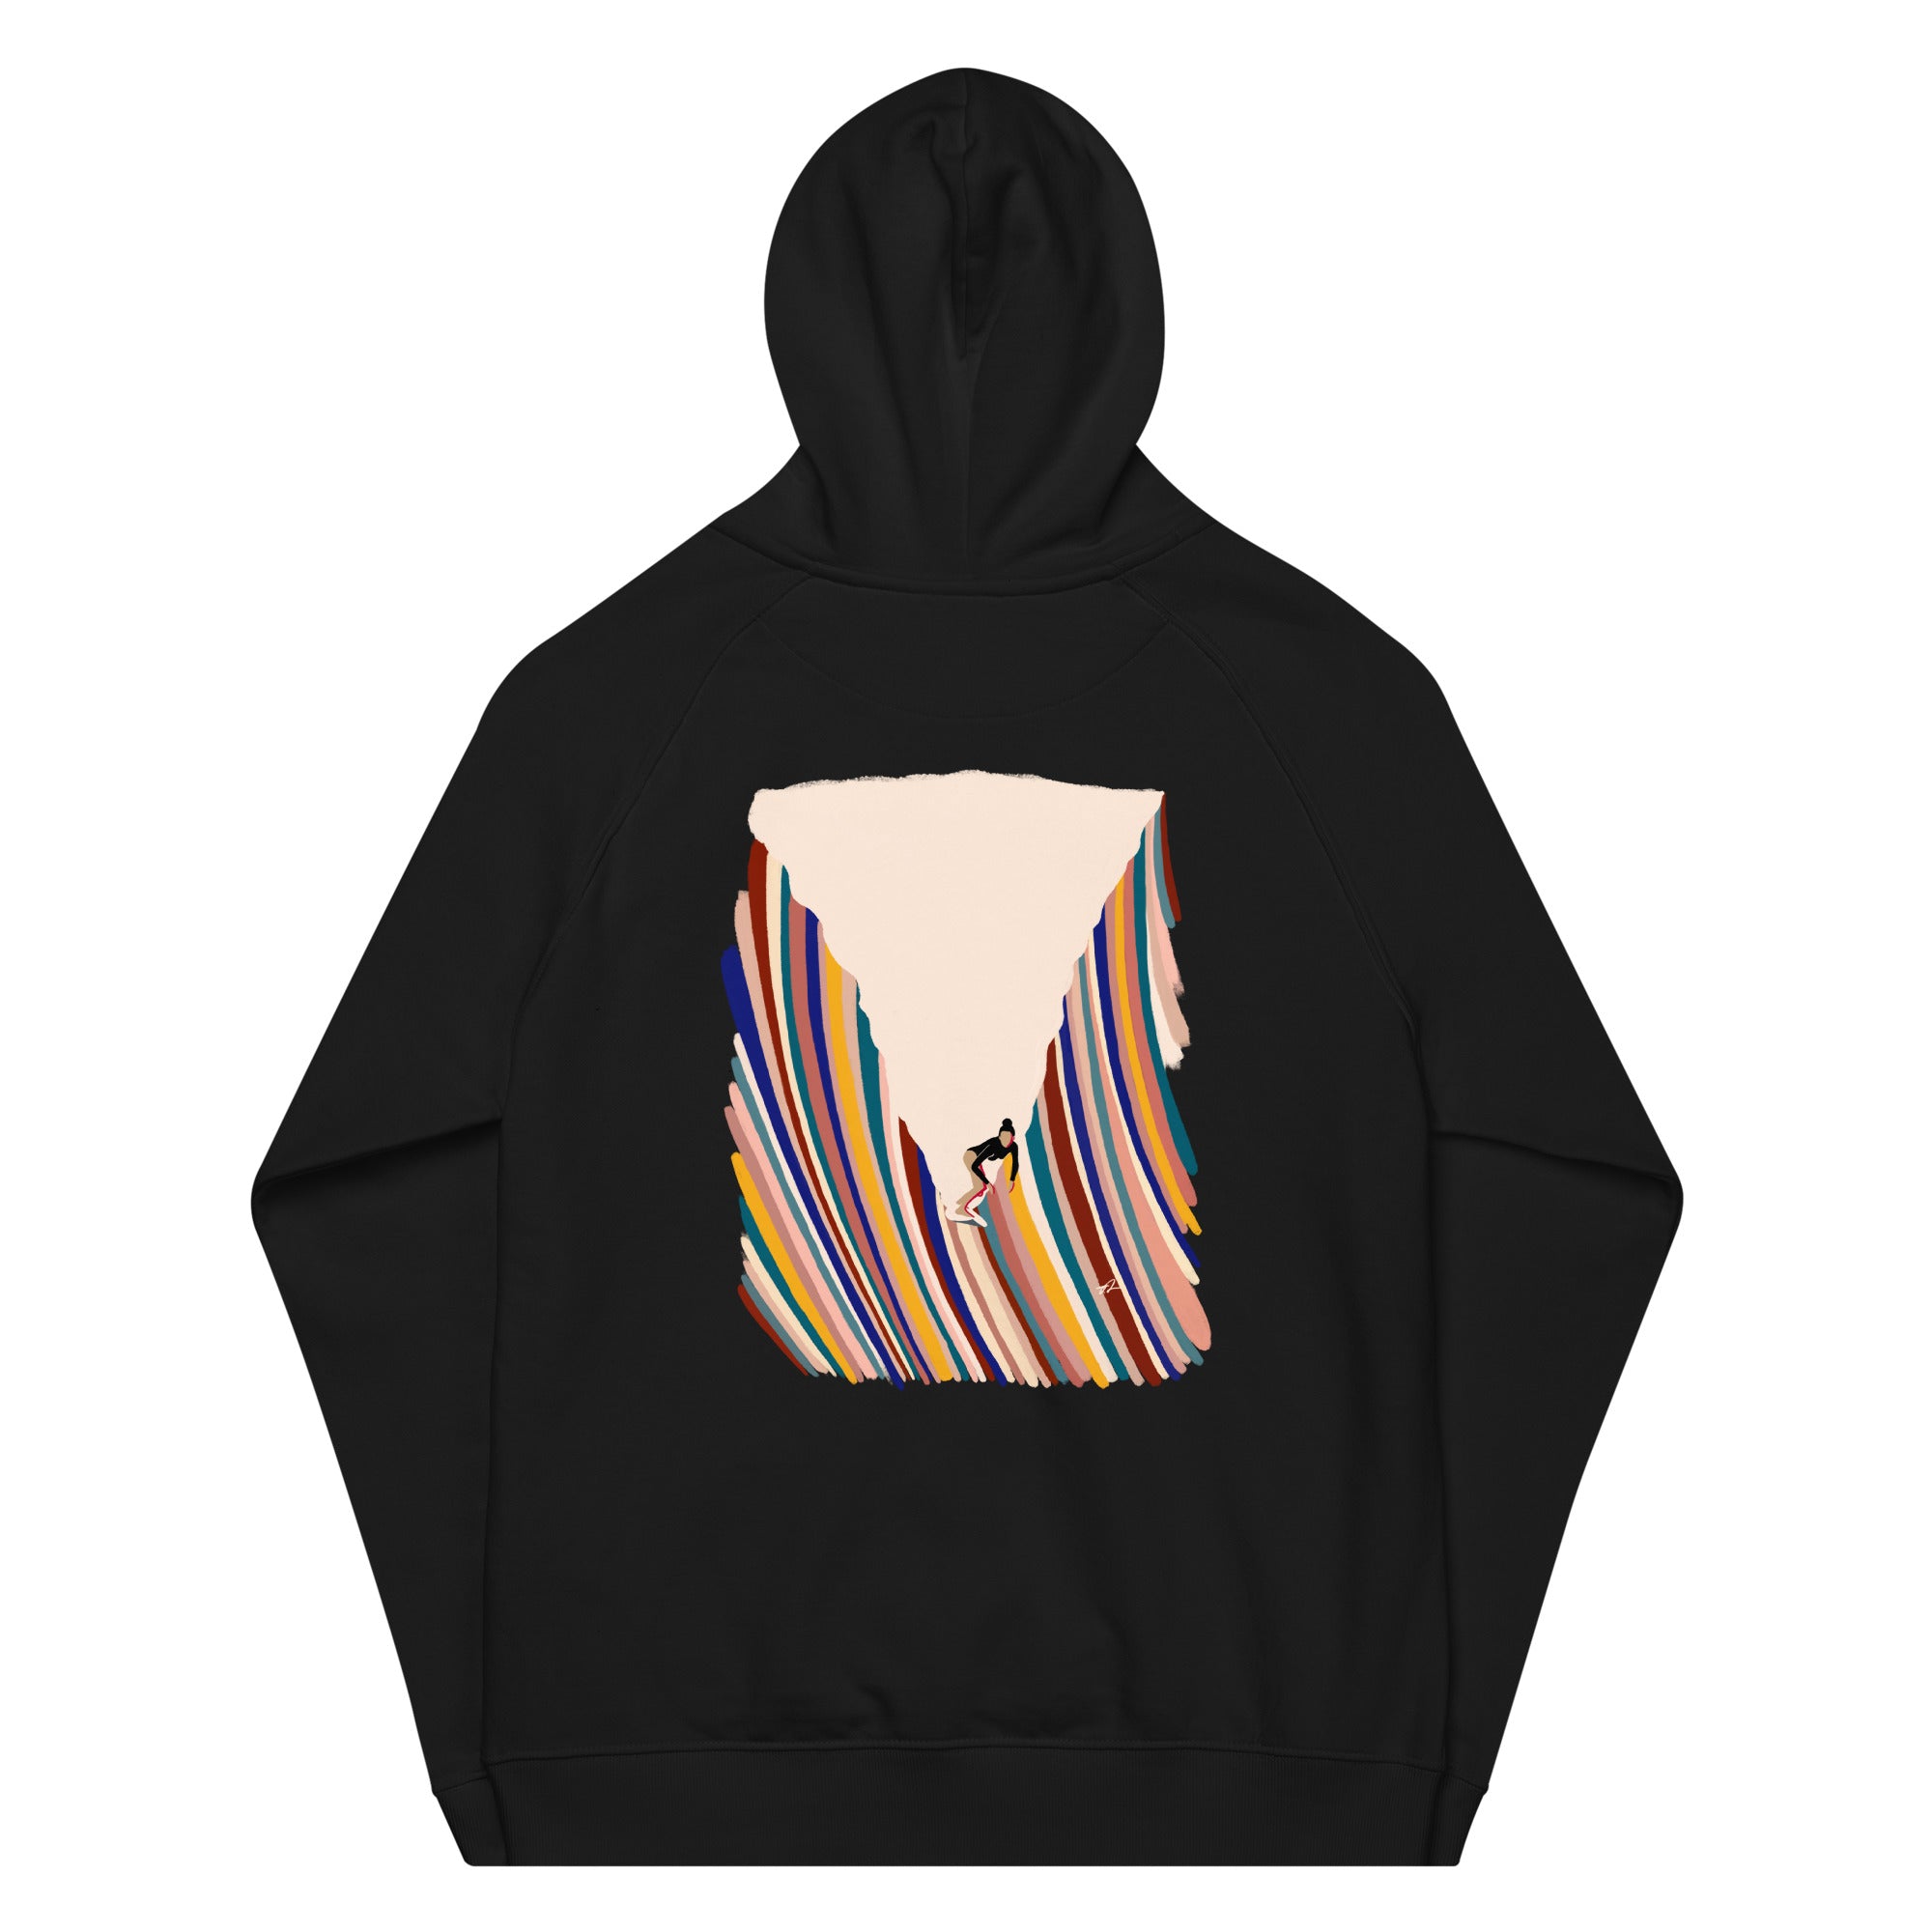 Conquering organic embroidery hoodie